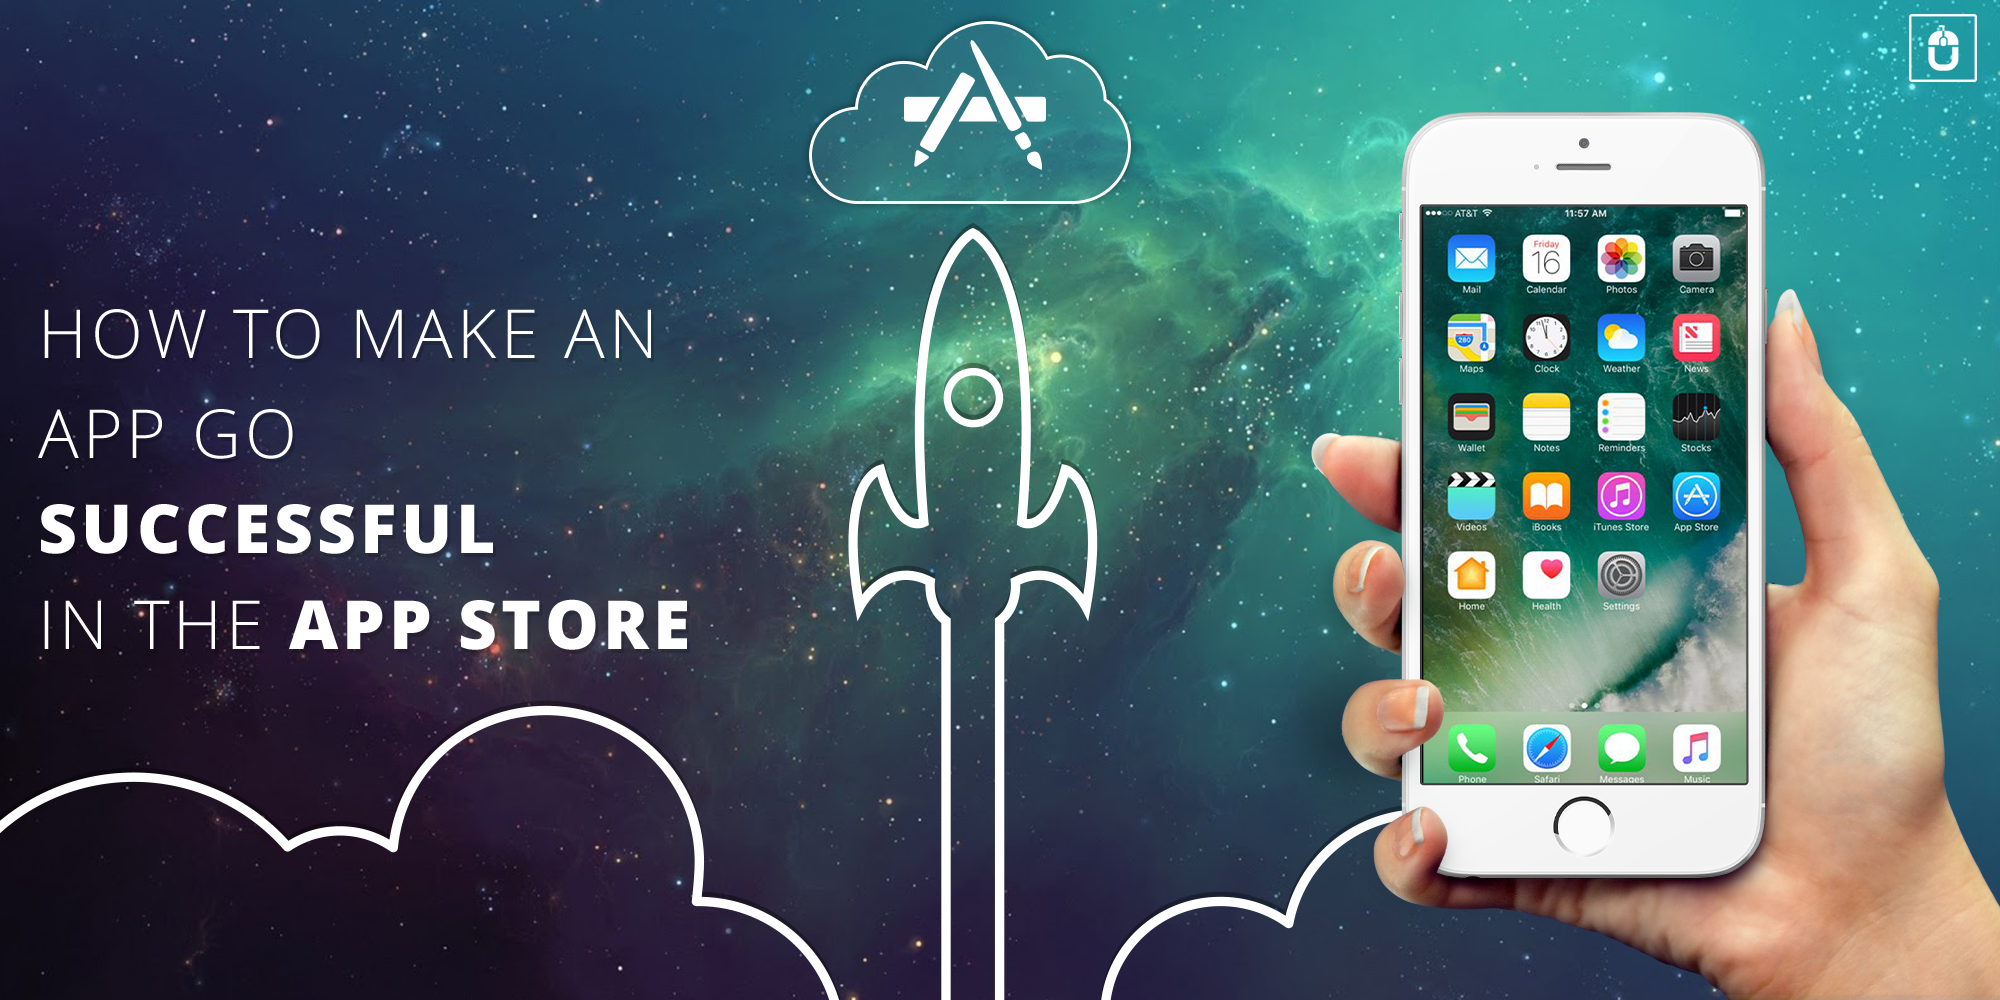 HOW TO MAKE AN APP GO SUCCESSFUL IN THE APP STORE